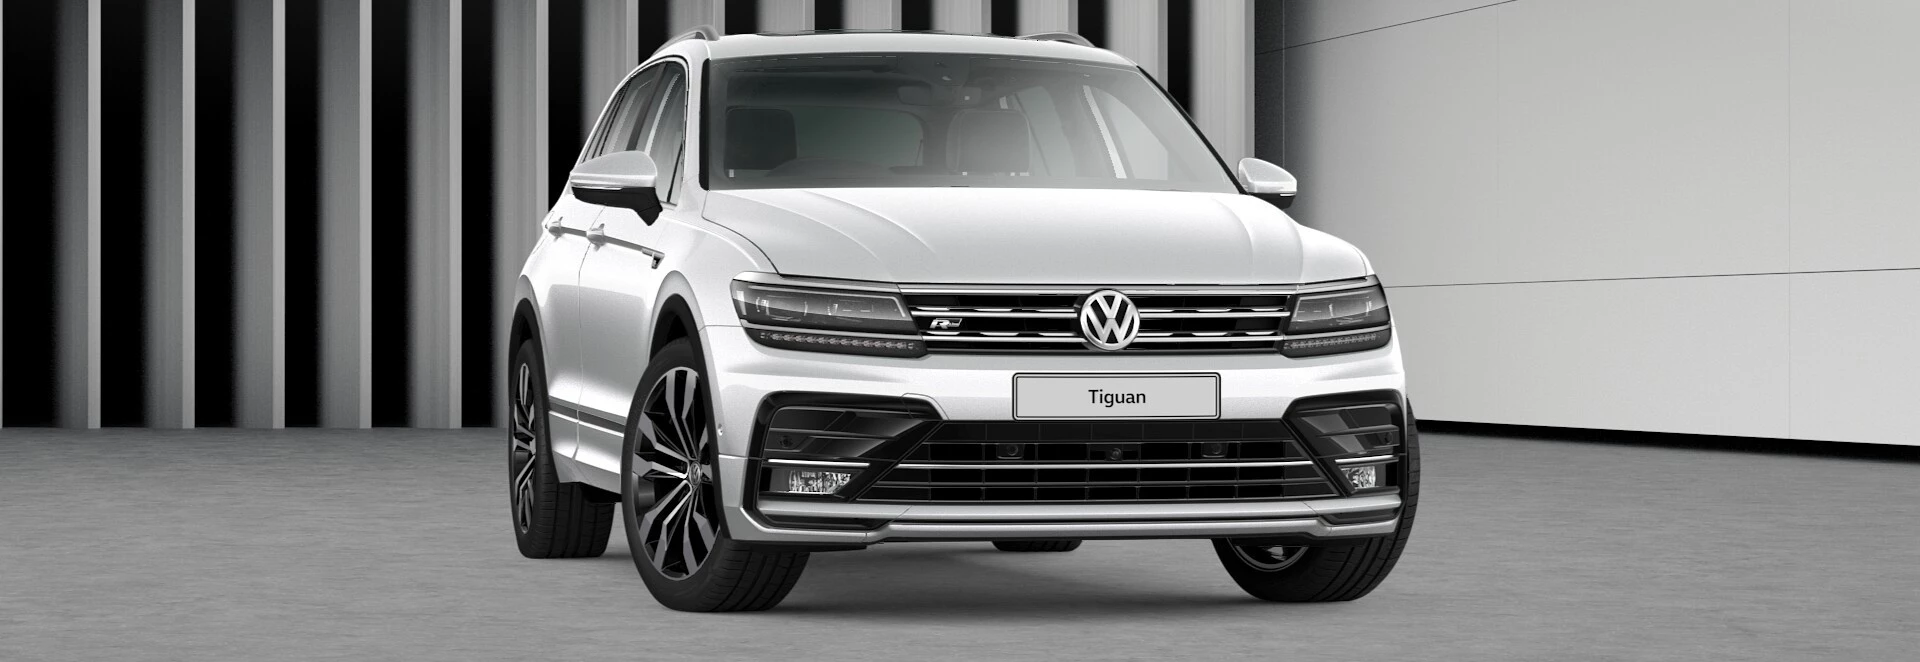 Volkswagen adds new trims and engine to Tiguan